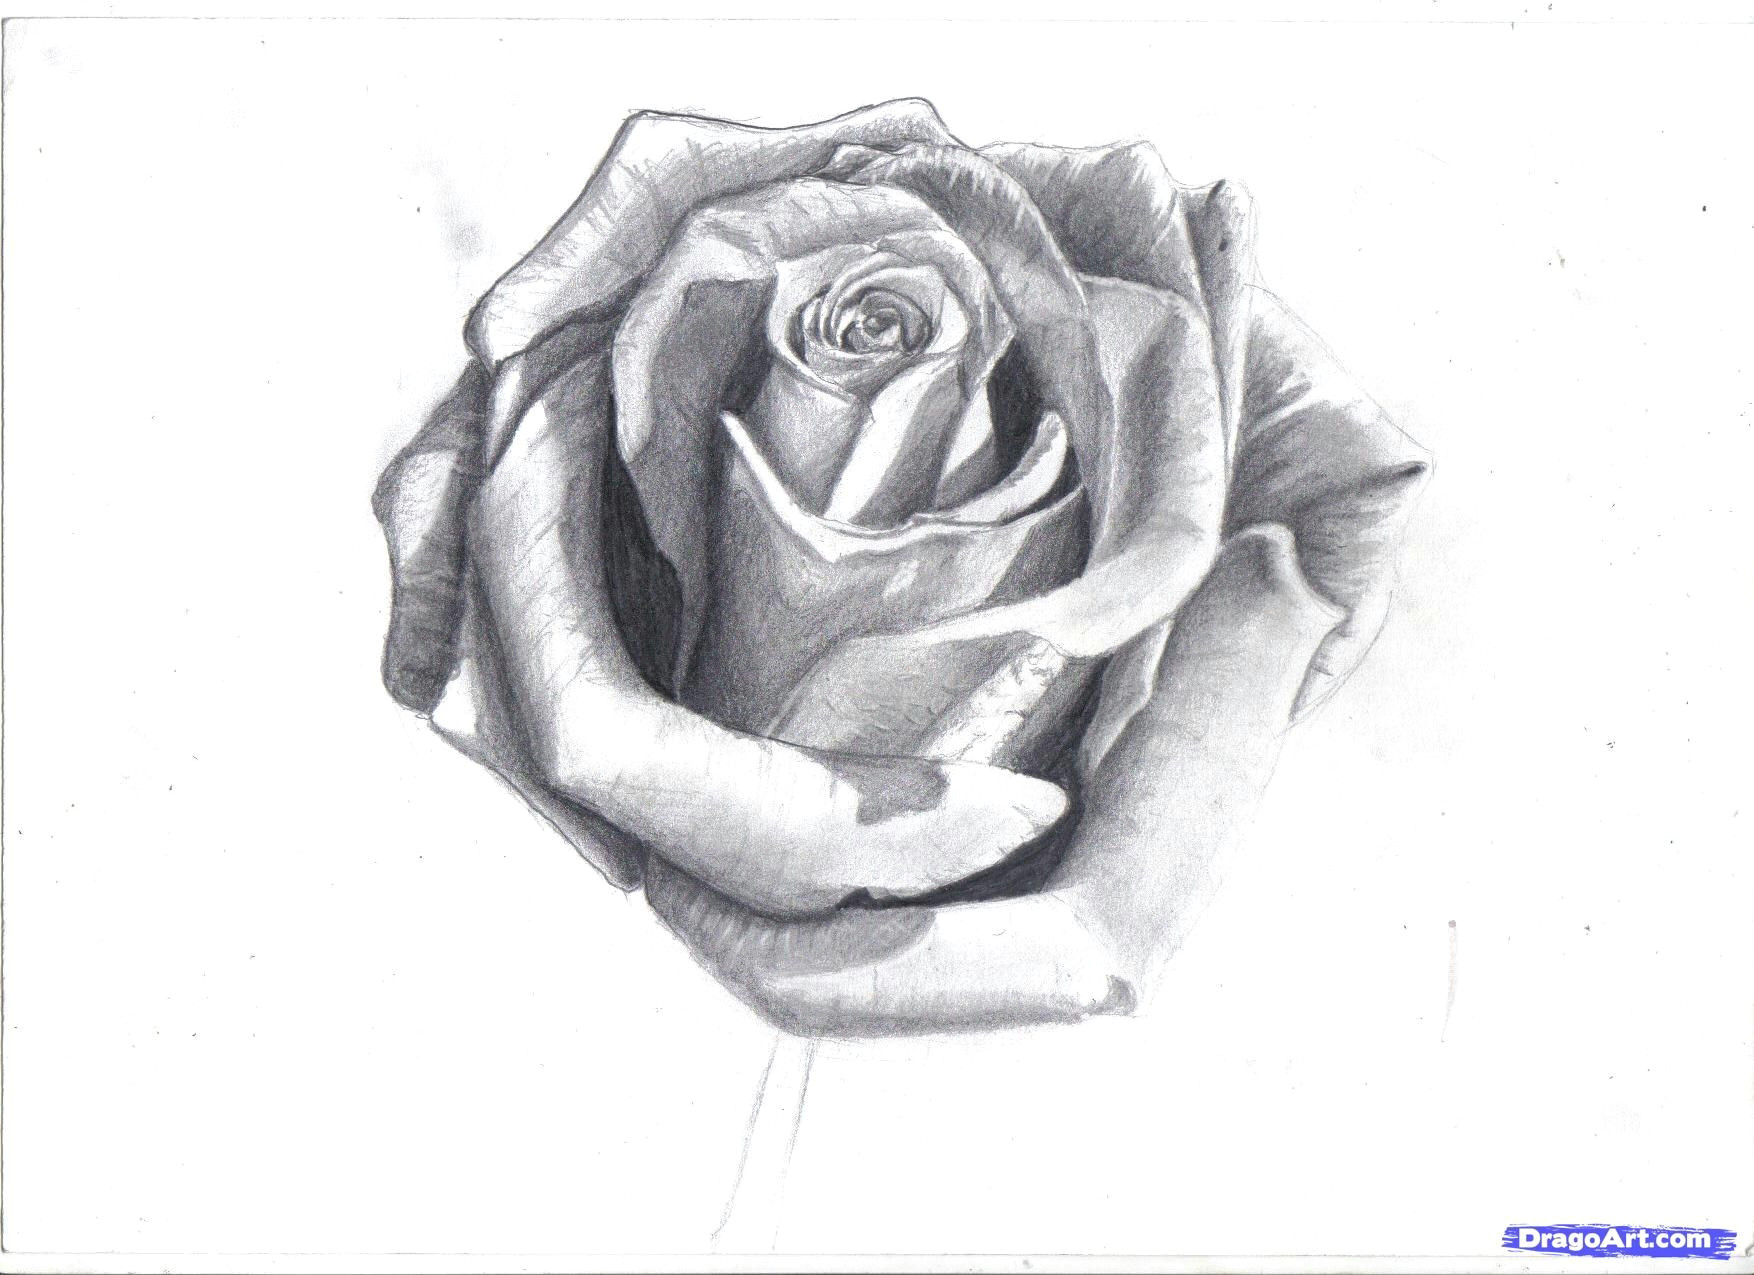 Pencil Drawings Of Flowers 8 How to Draw A Rose In Pencil Draw A Realistic Rose Step by Step